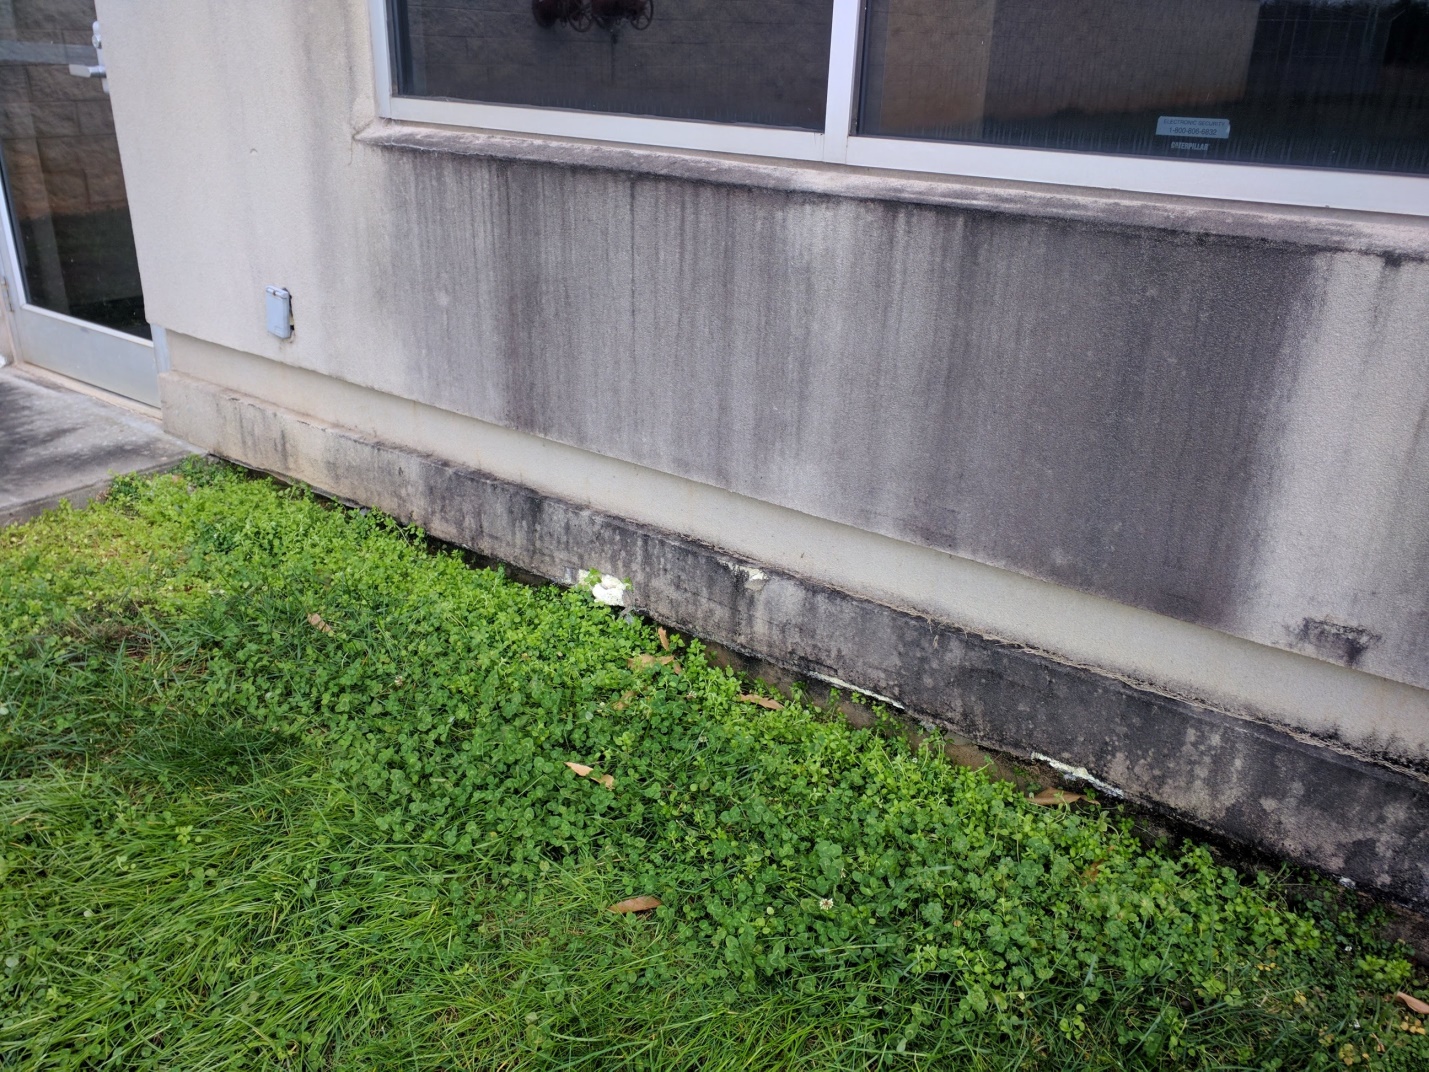 Damage to stucco around exterior from landscape operations